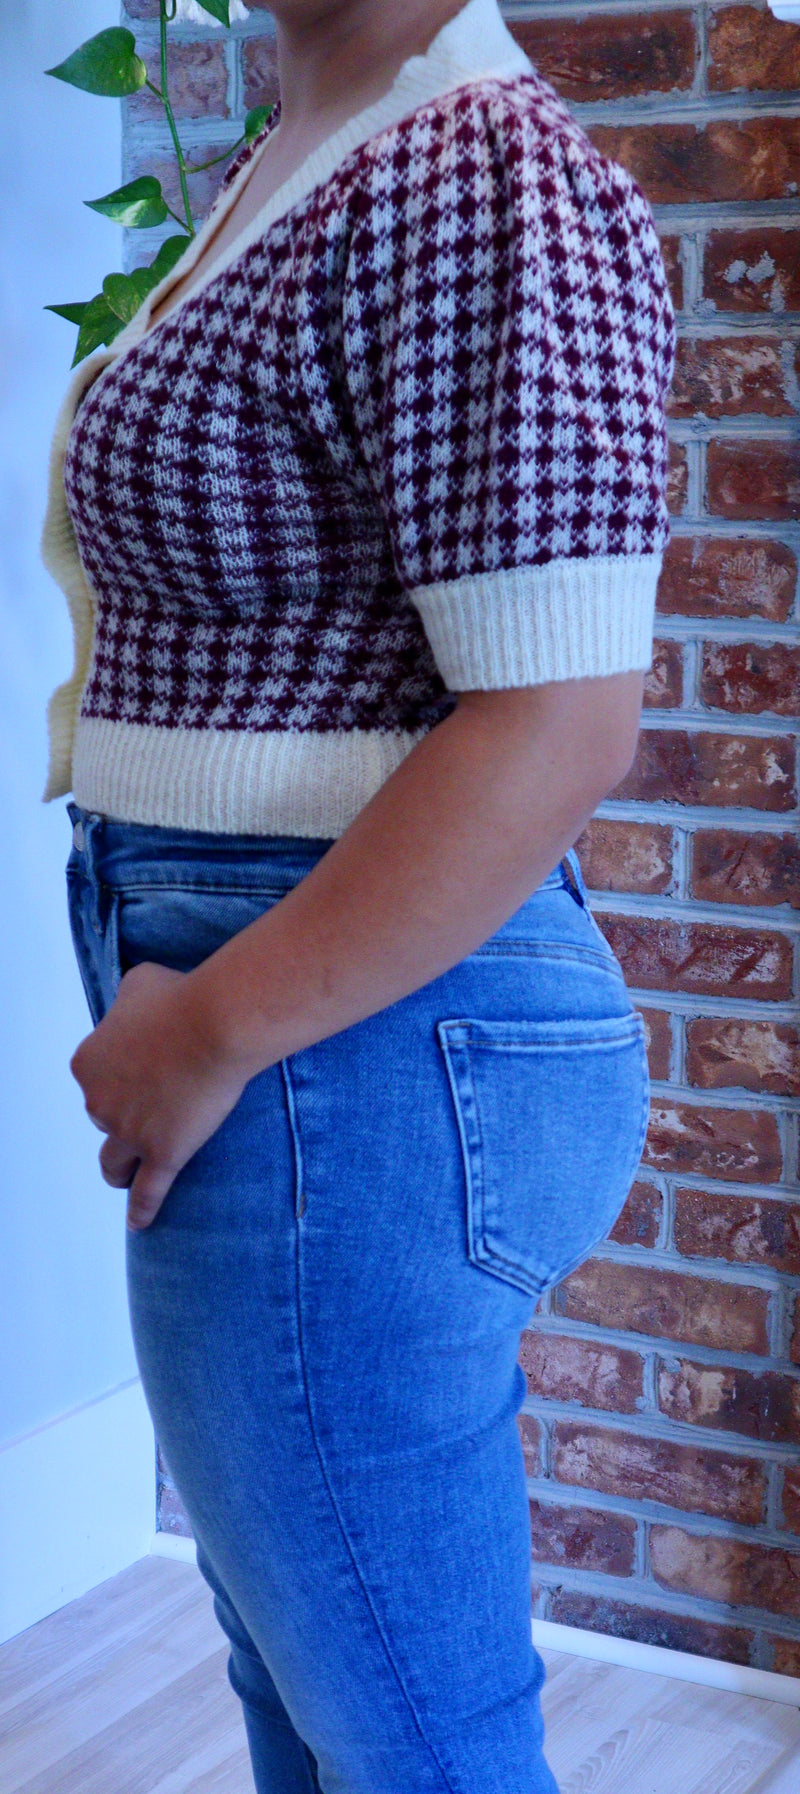 Ivory/Periwinkle Gingham Sweater Top